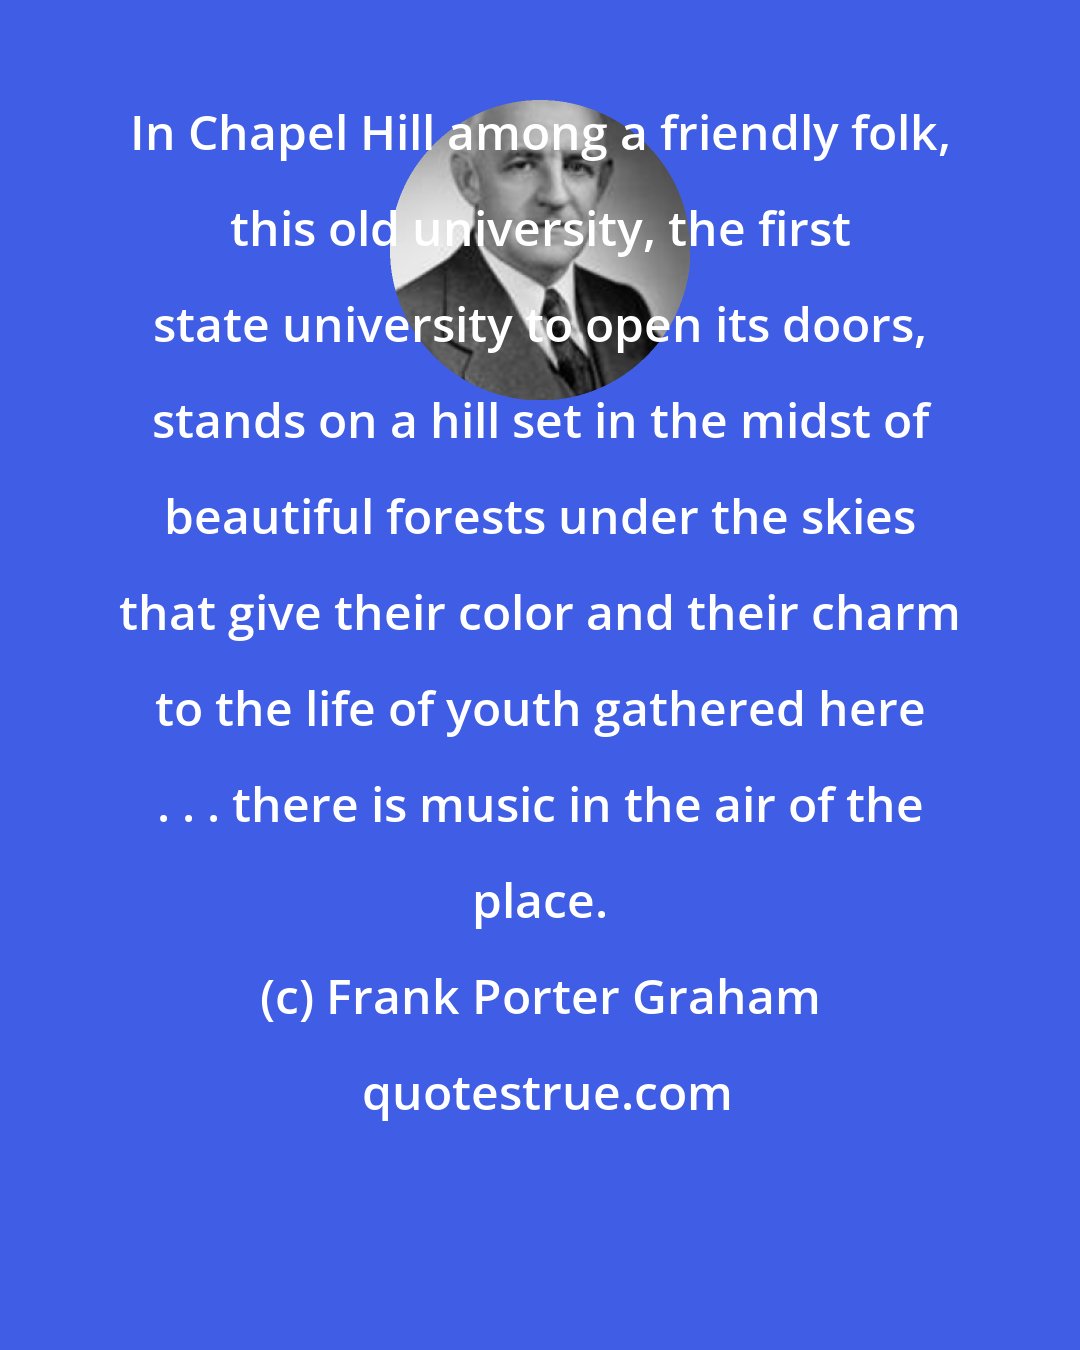 Frank Porter Graham: In Chapel Hill among a friendly folk, this old university, the first state university to open its doors, stands on a hill set in the midst of beautiful forests under the skies that give their color and their charm to the life of youth gathered here . . . there is music in the air of the place.